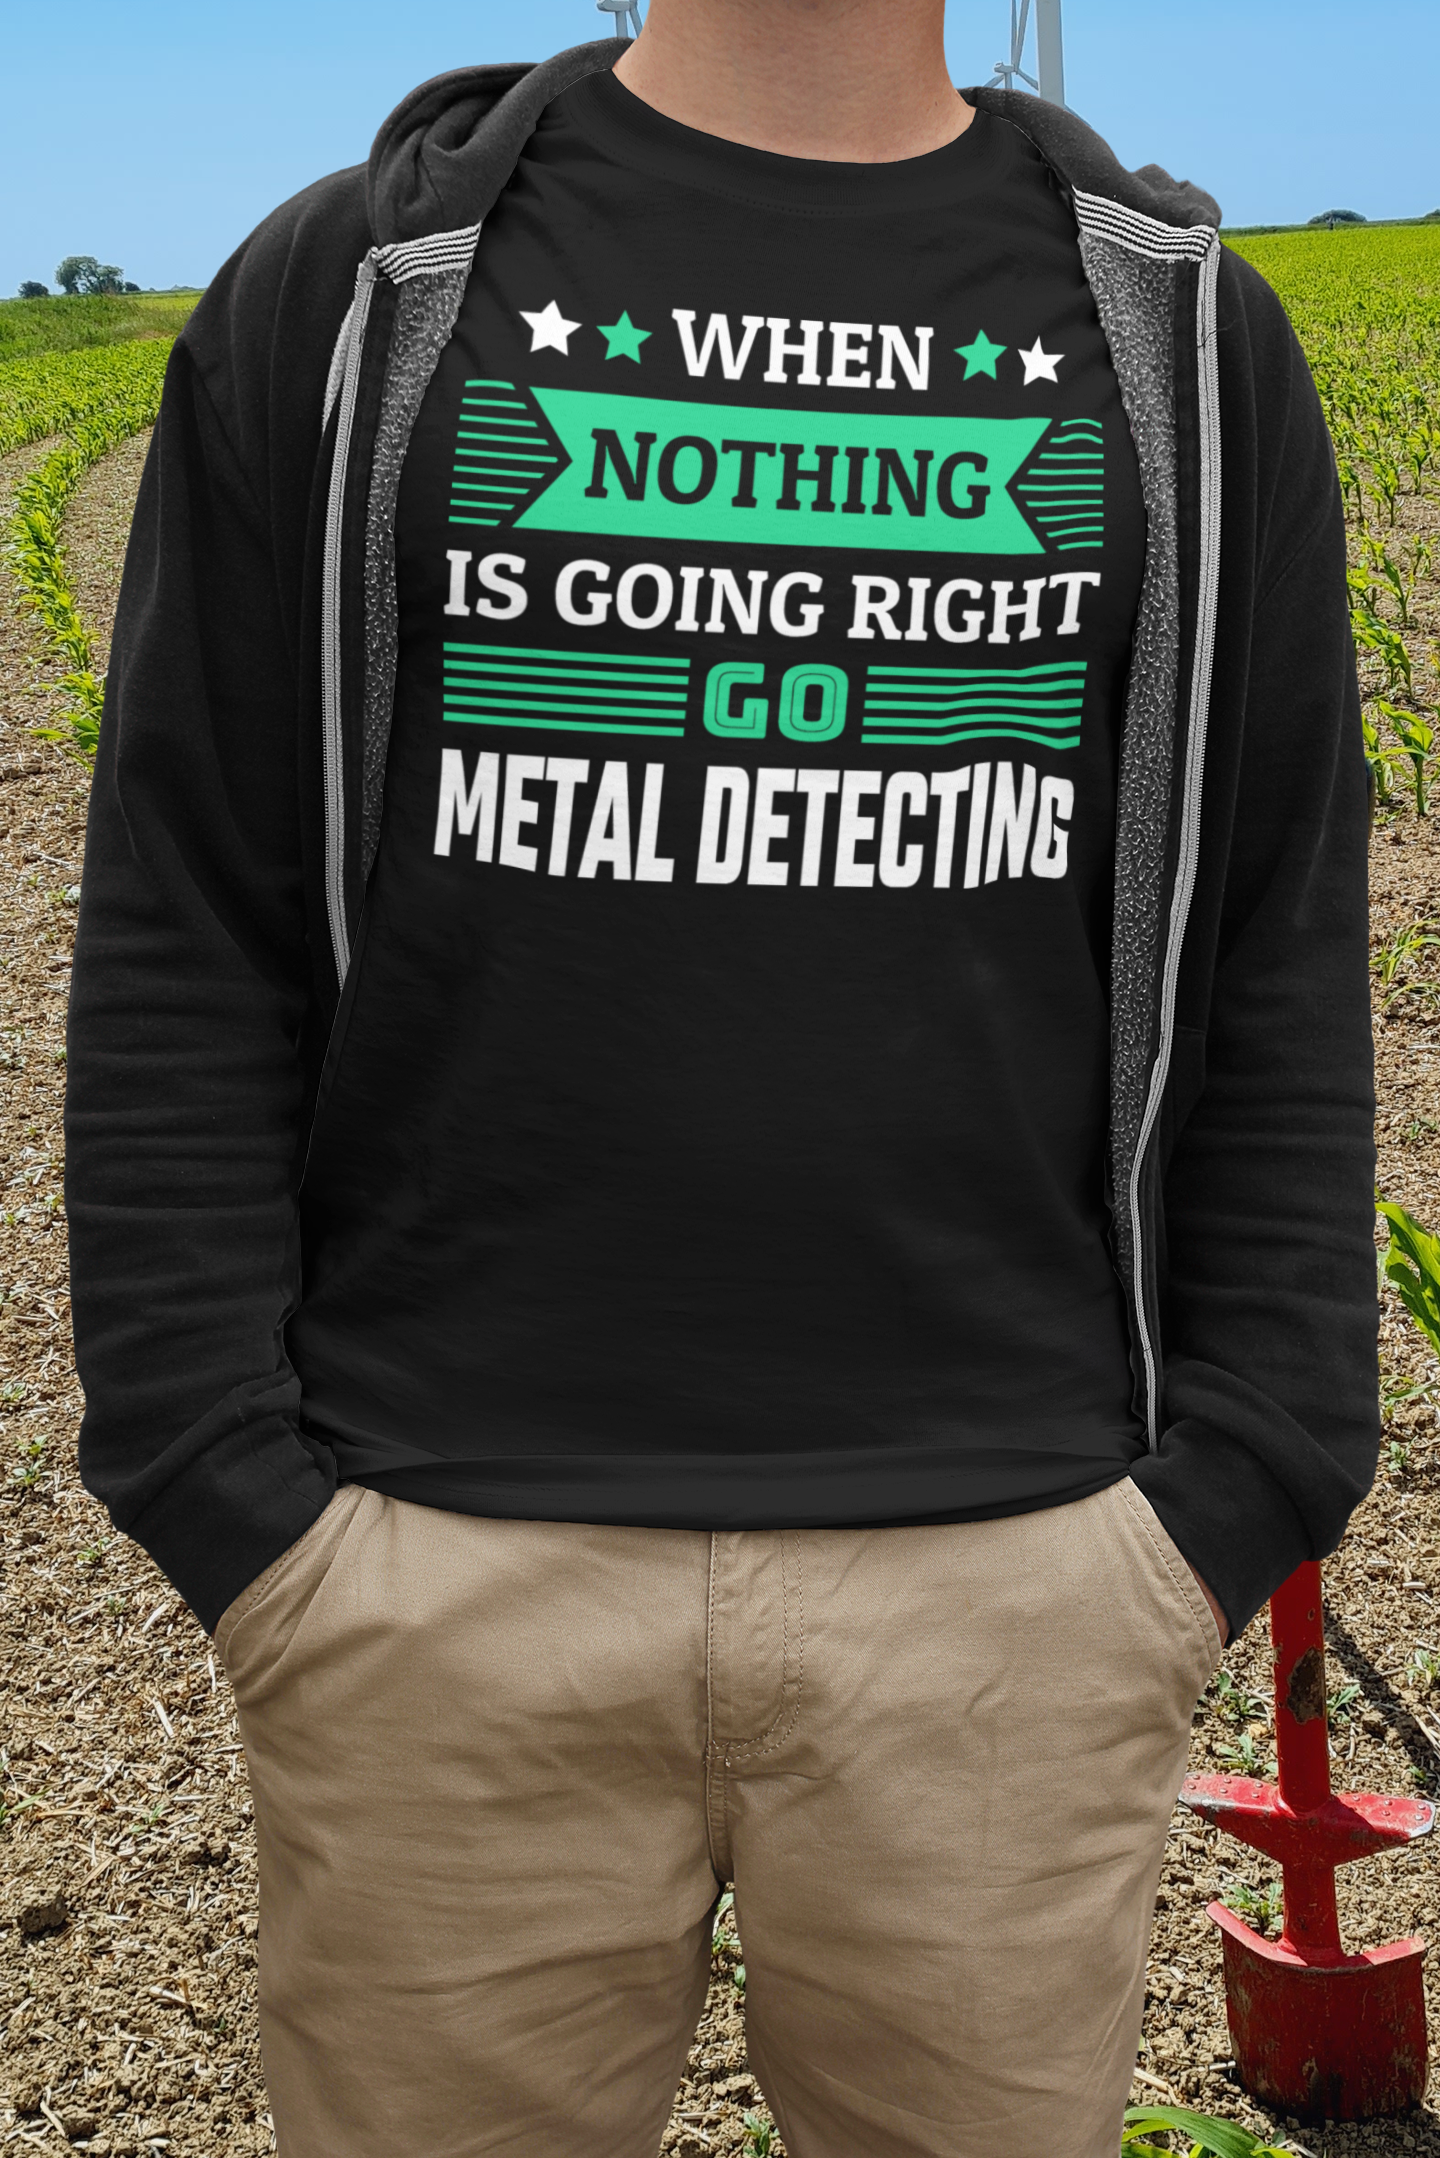 When nothing is going right go metal detecting